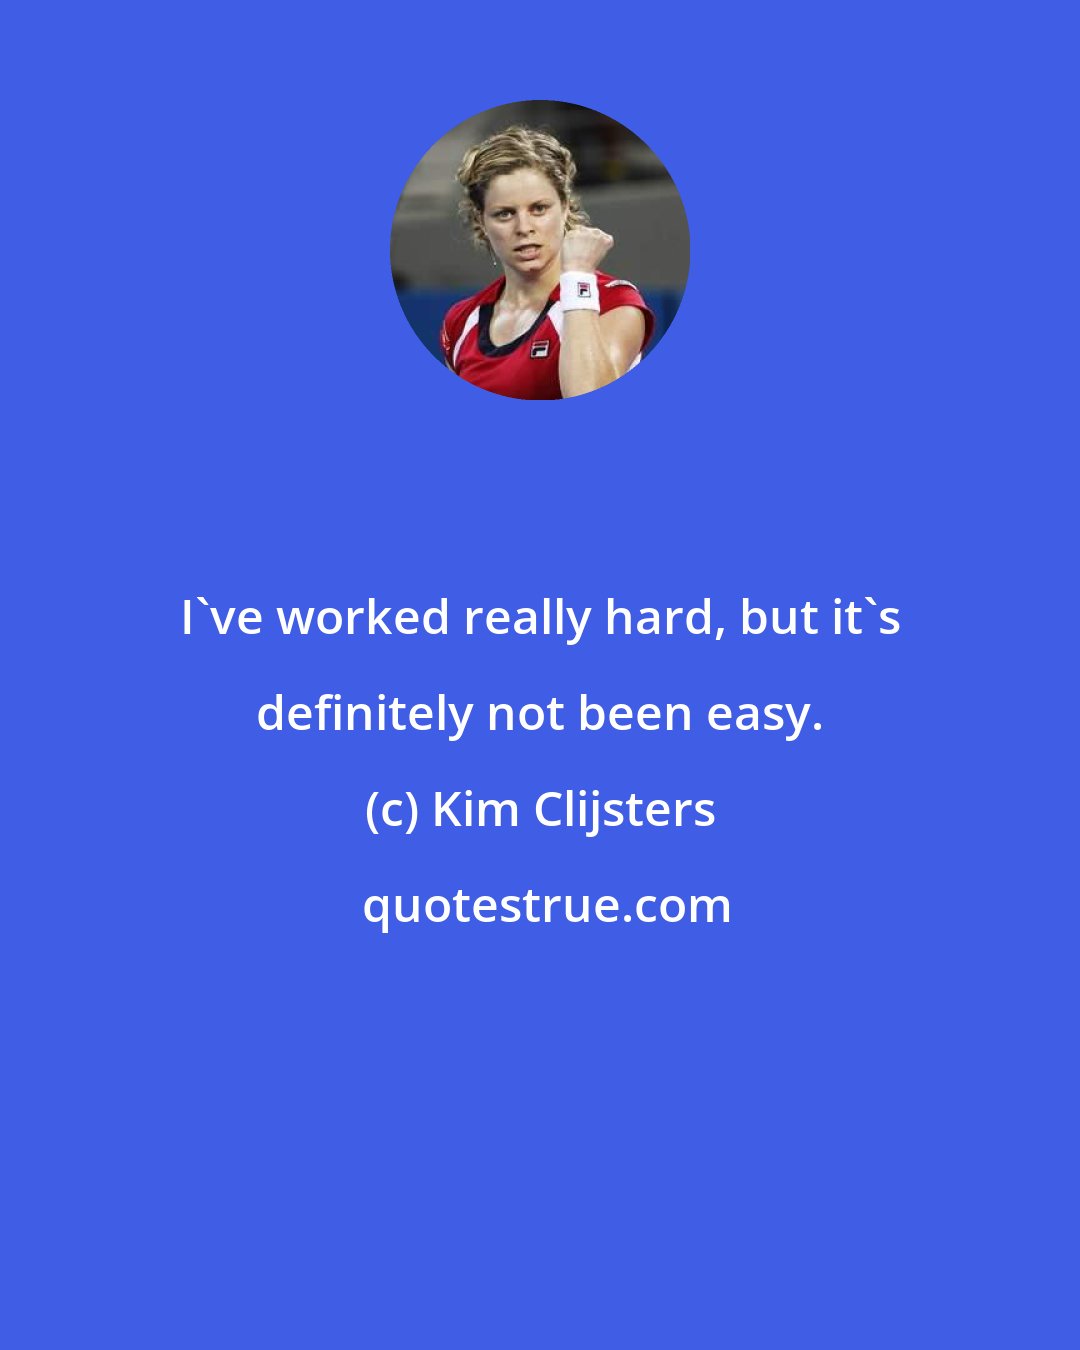 Kim Clijsters: I've worked really hard, but it's definitely not been easy.